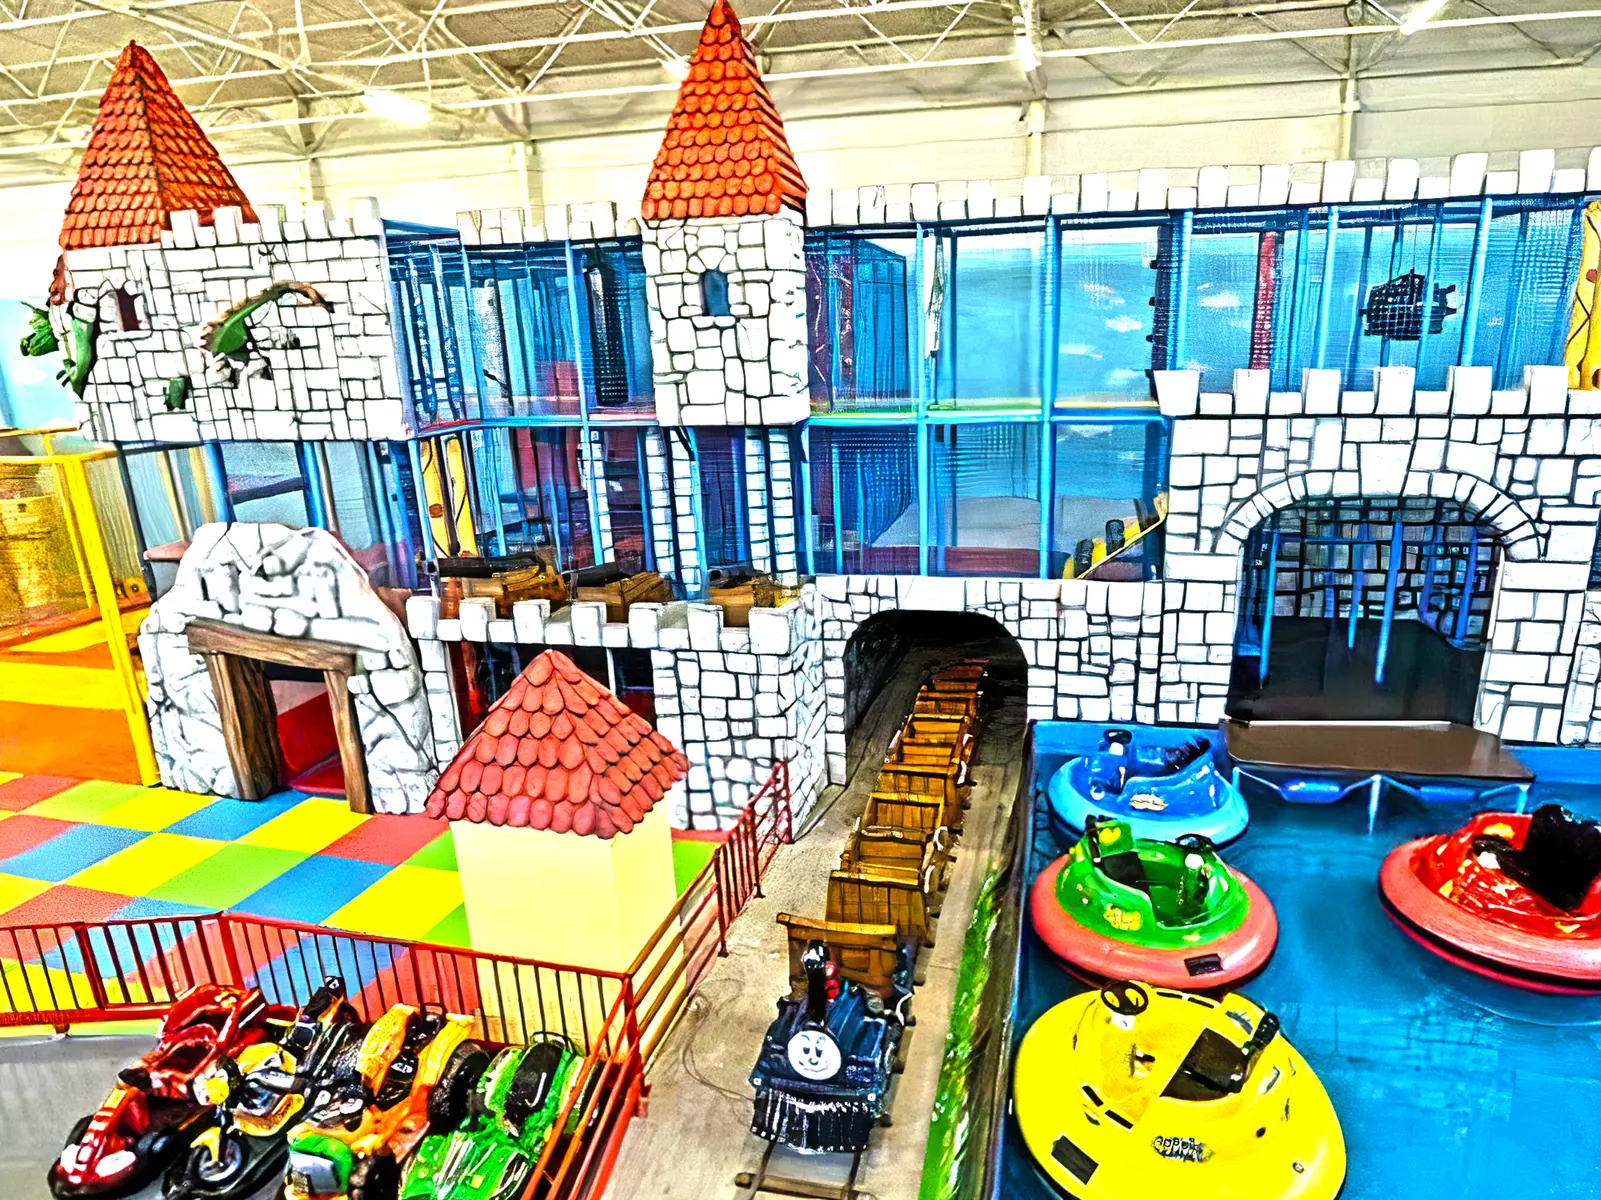 Multilevel indoor playground labyrinth in Europe with other equipment